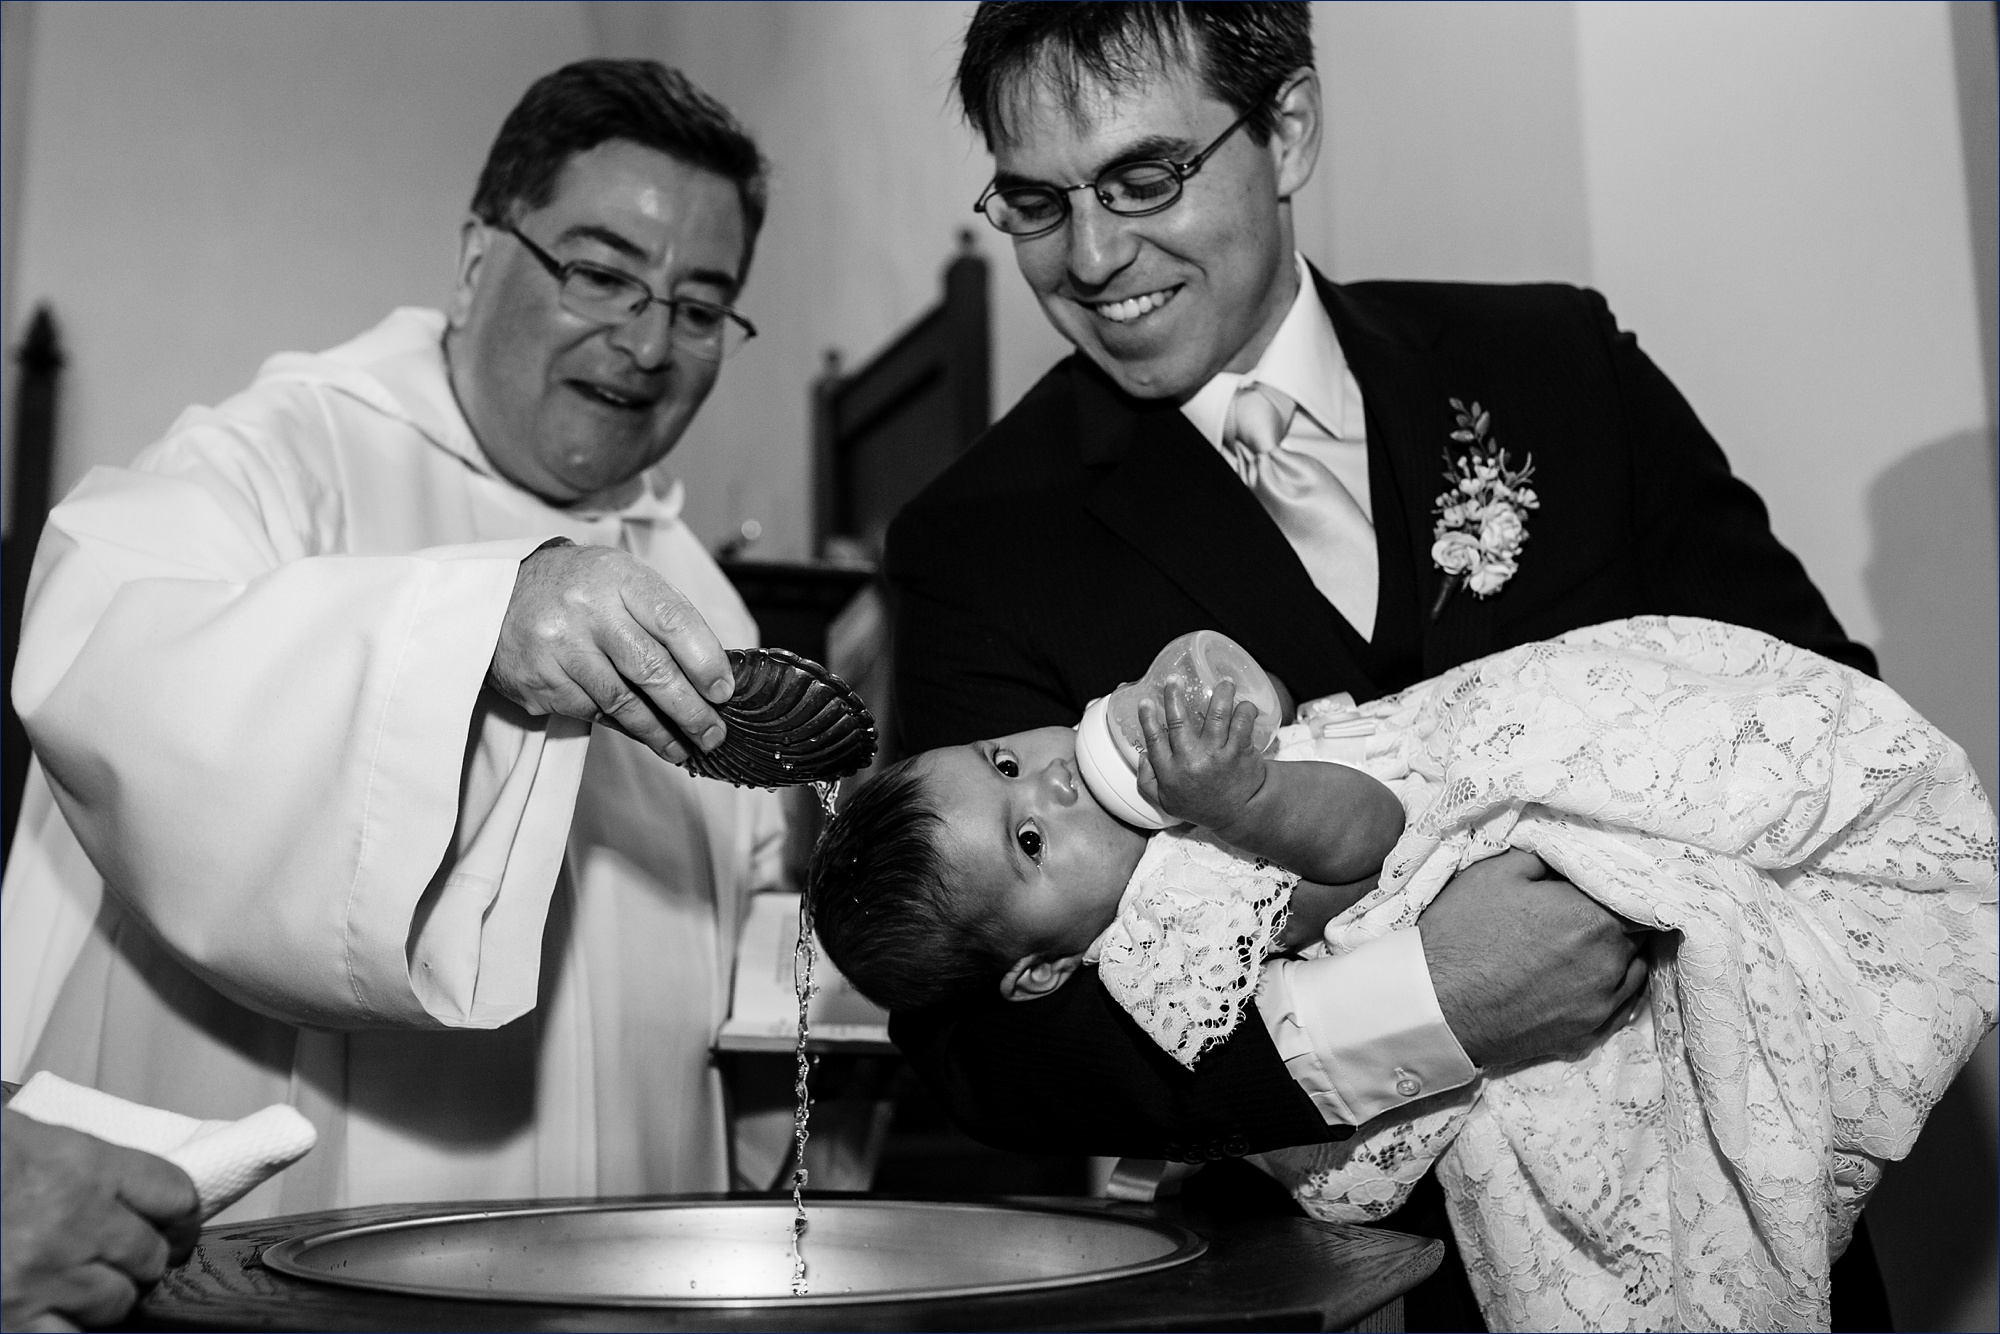 The newlyweds have their daughter baptized as part of their wedding ceremony in Dartmouth New Hampshire